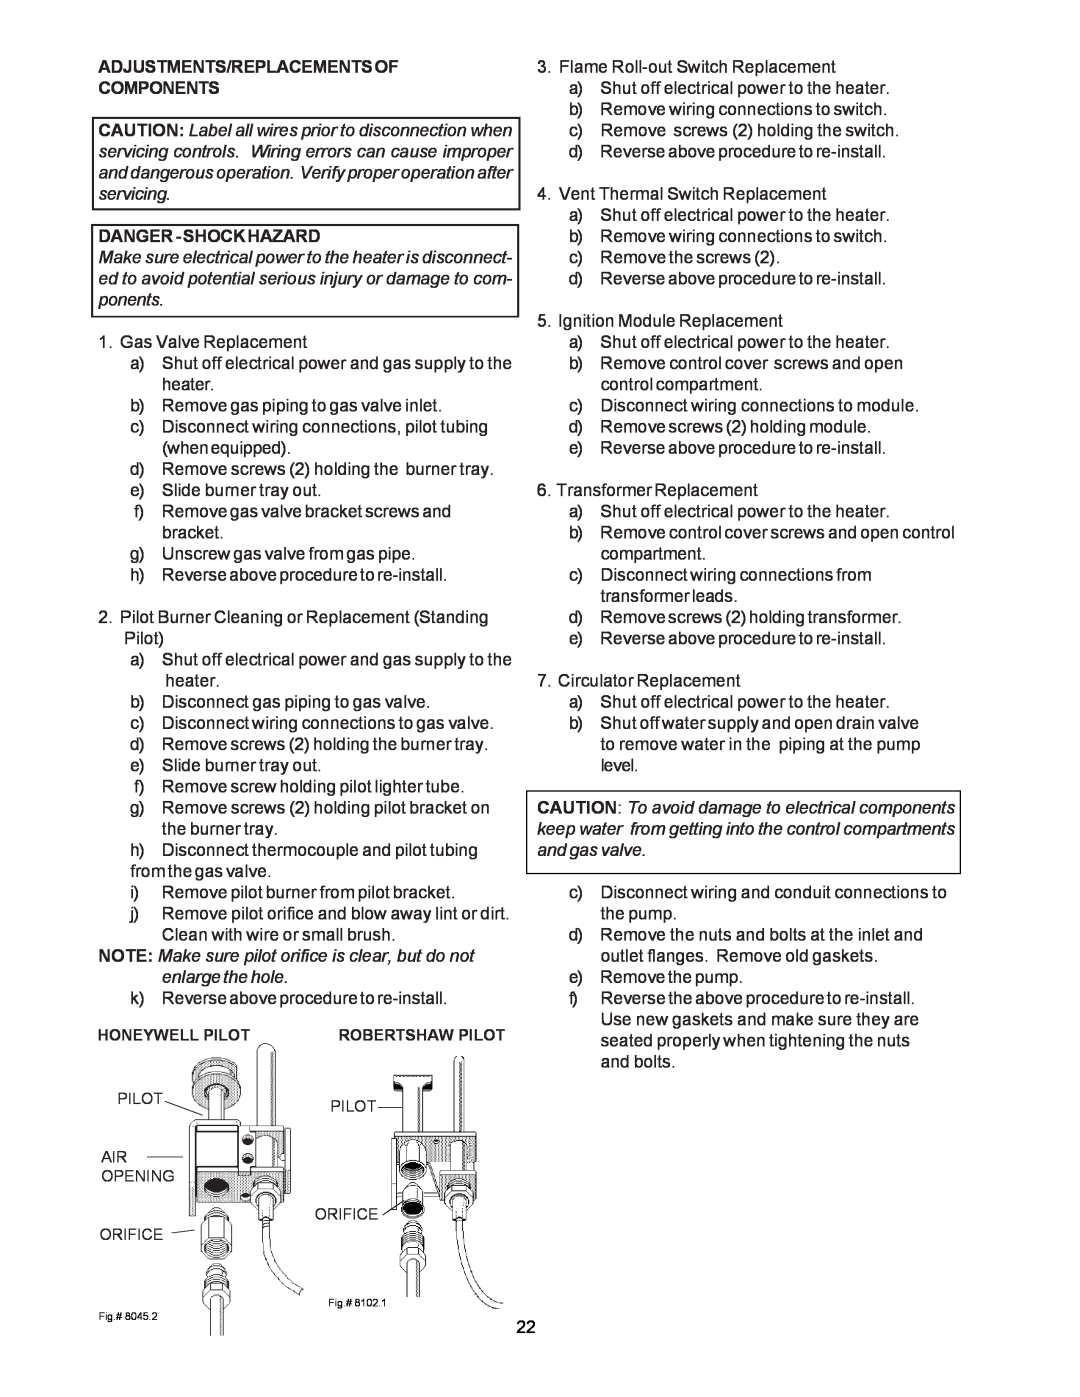 Raypak 135A, 195A, 090A manual Adjustments/Replacementsof Components, Danger-Shockhazard 